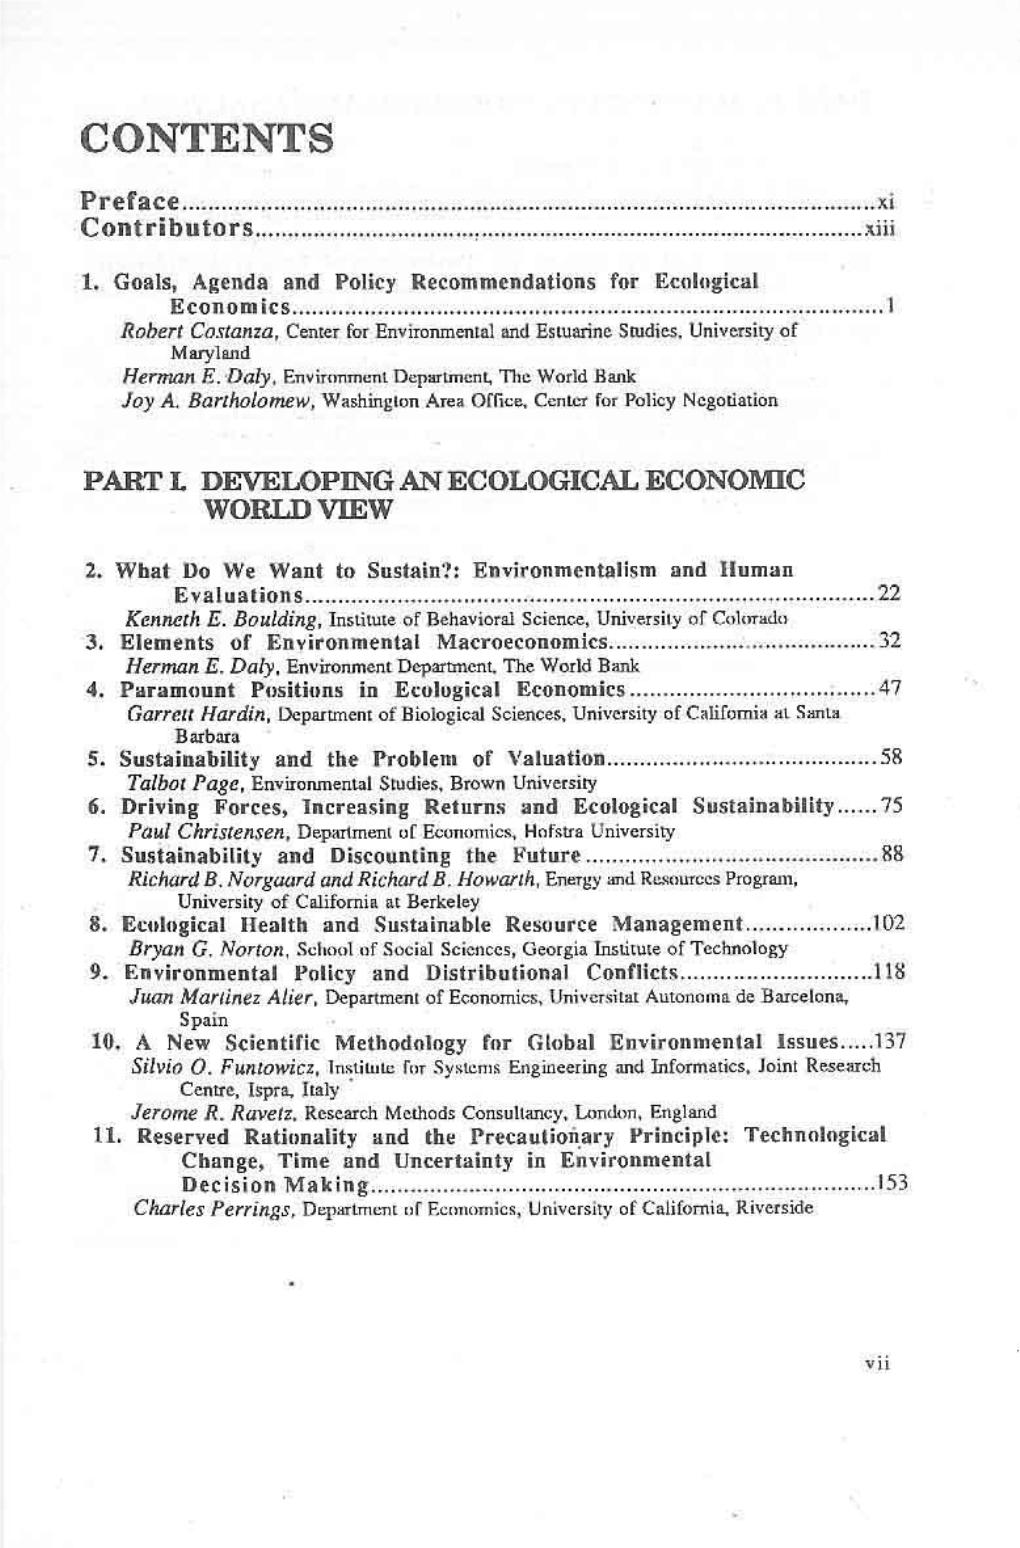 21. Assuring Sustainability of Ecological Economic Systems 331 Robert Costama, Center for Environmental and Estuarinc Studie*, University of Maryland 22